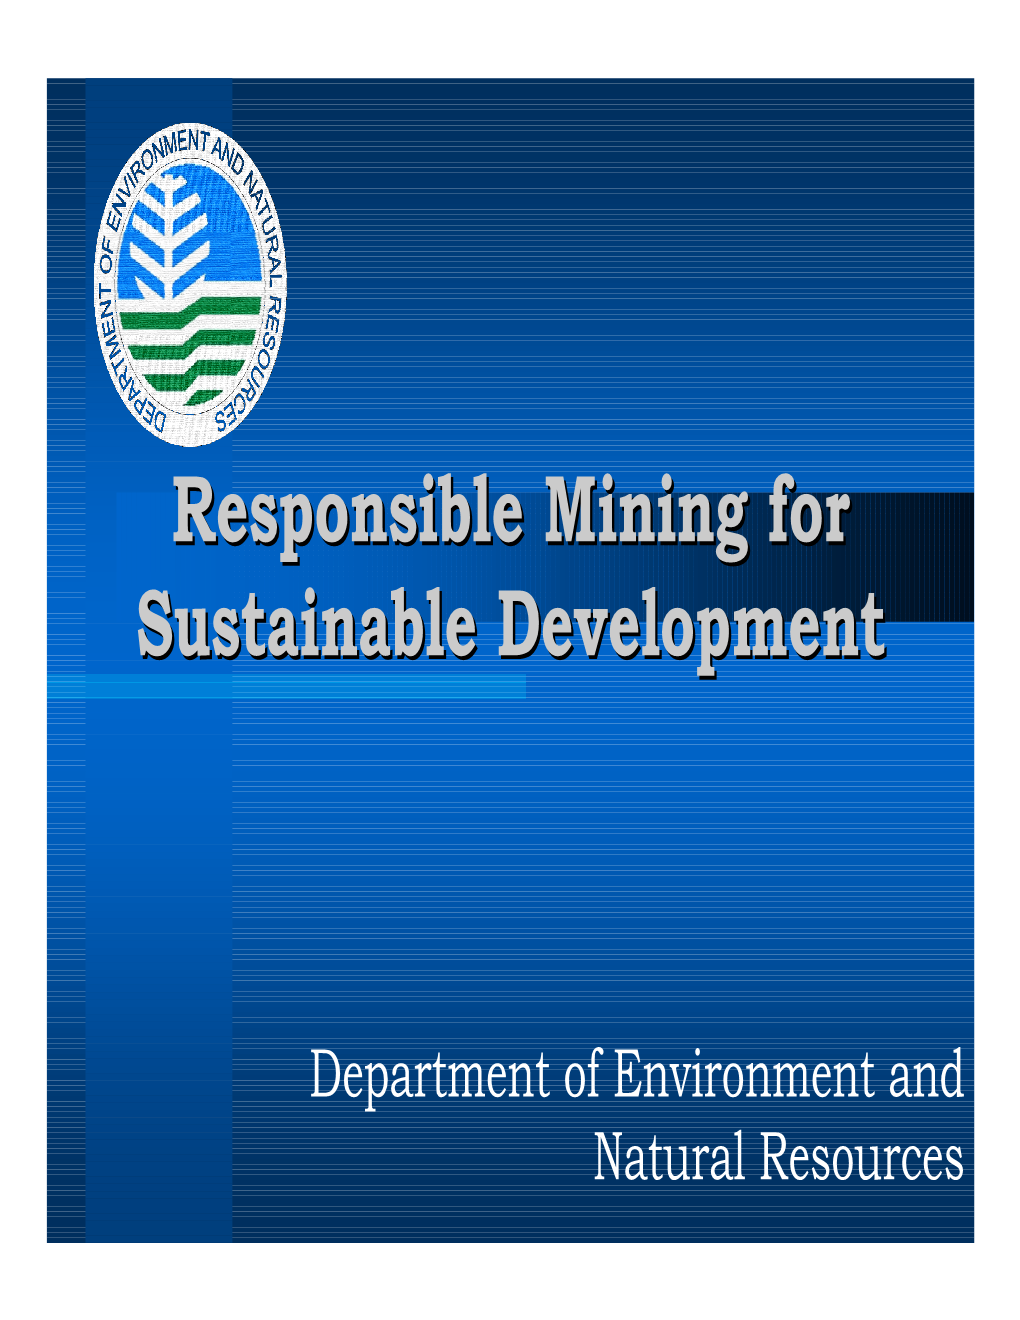 Responsible Mining for Sustainable Development